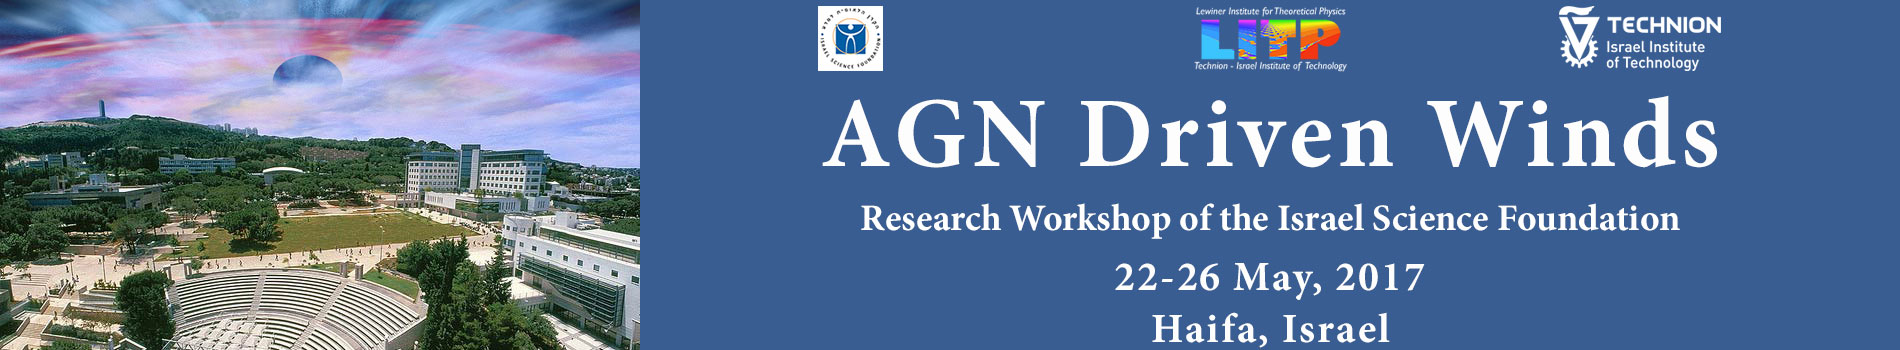 AGN Driven winds 2017 conference banner